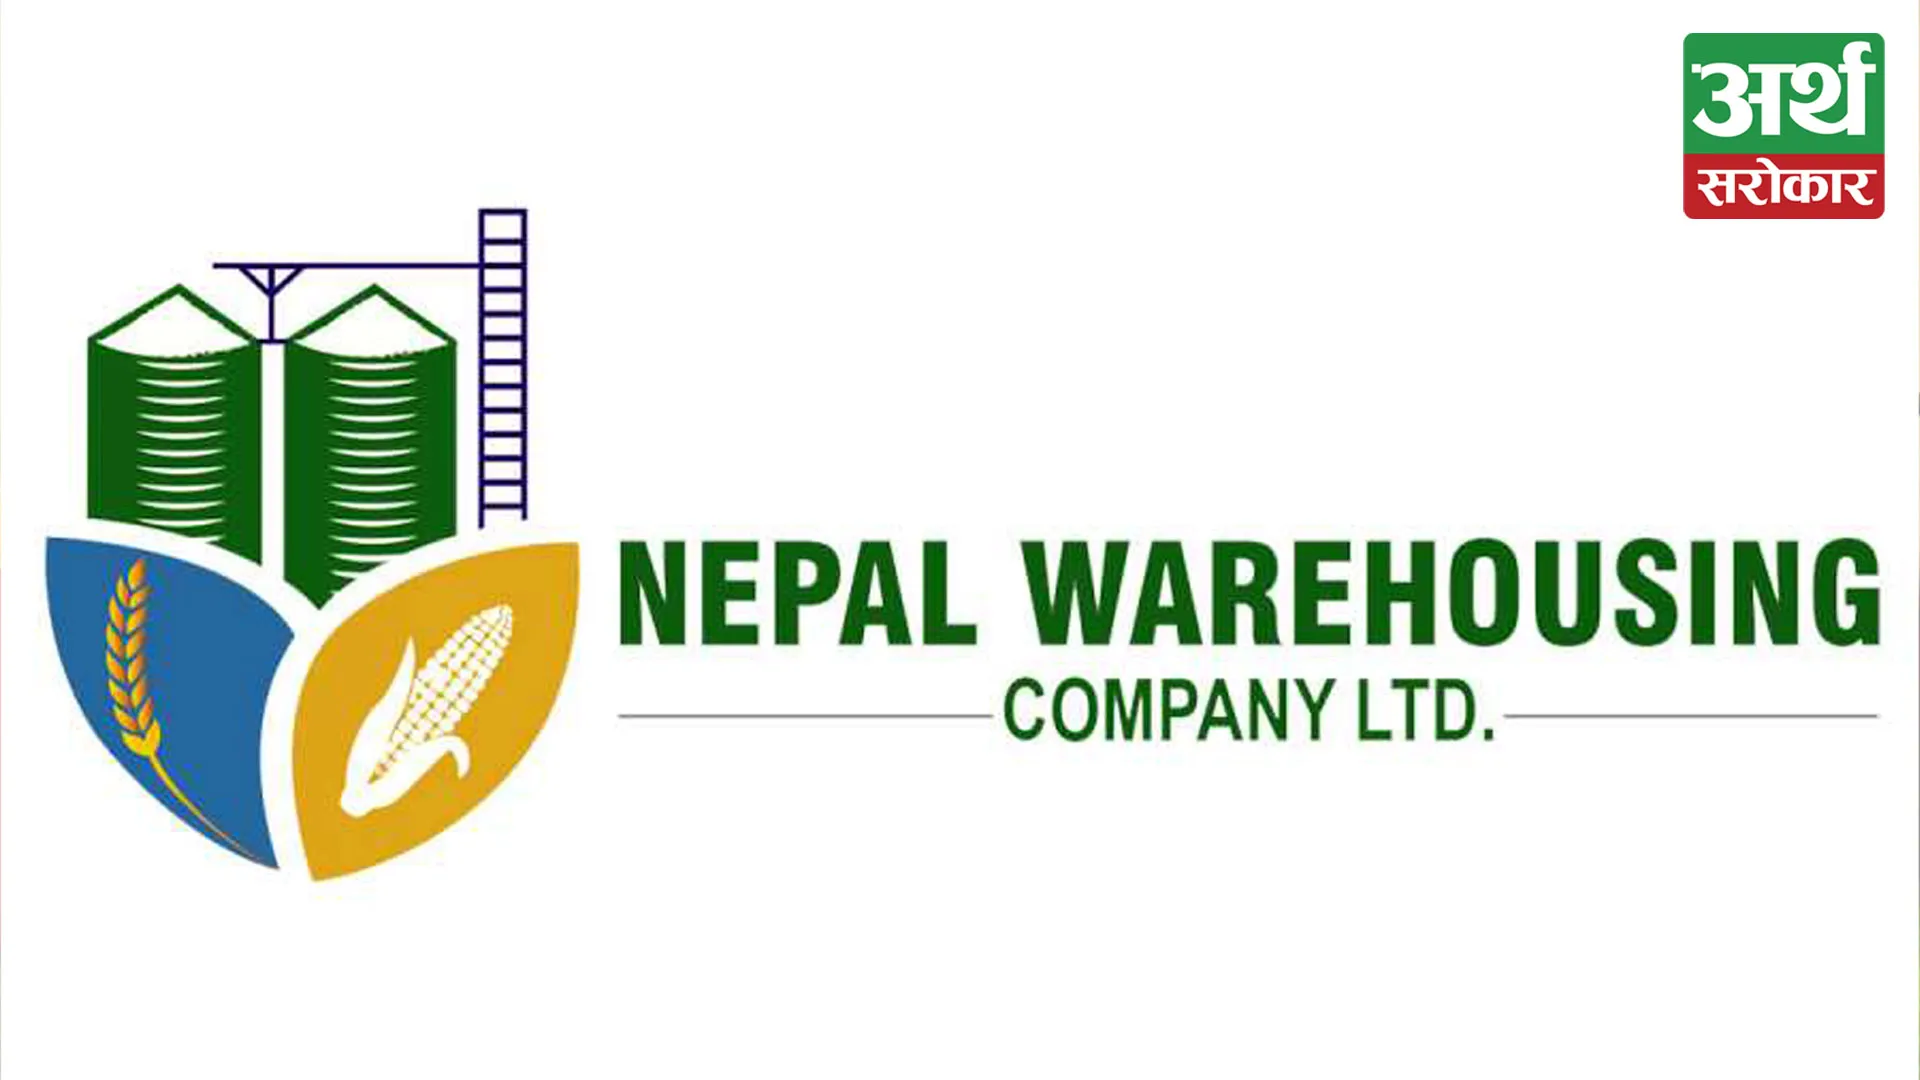 Nepal Warehousing Company’s IPO has been distributed